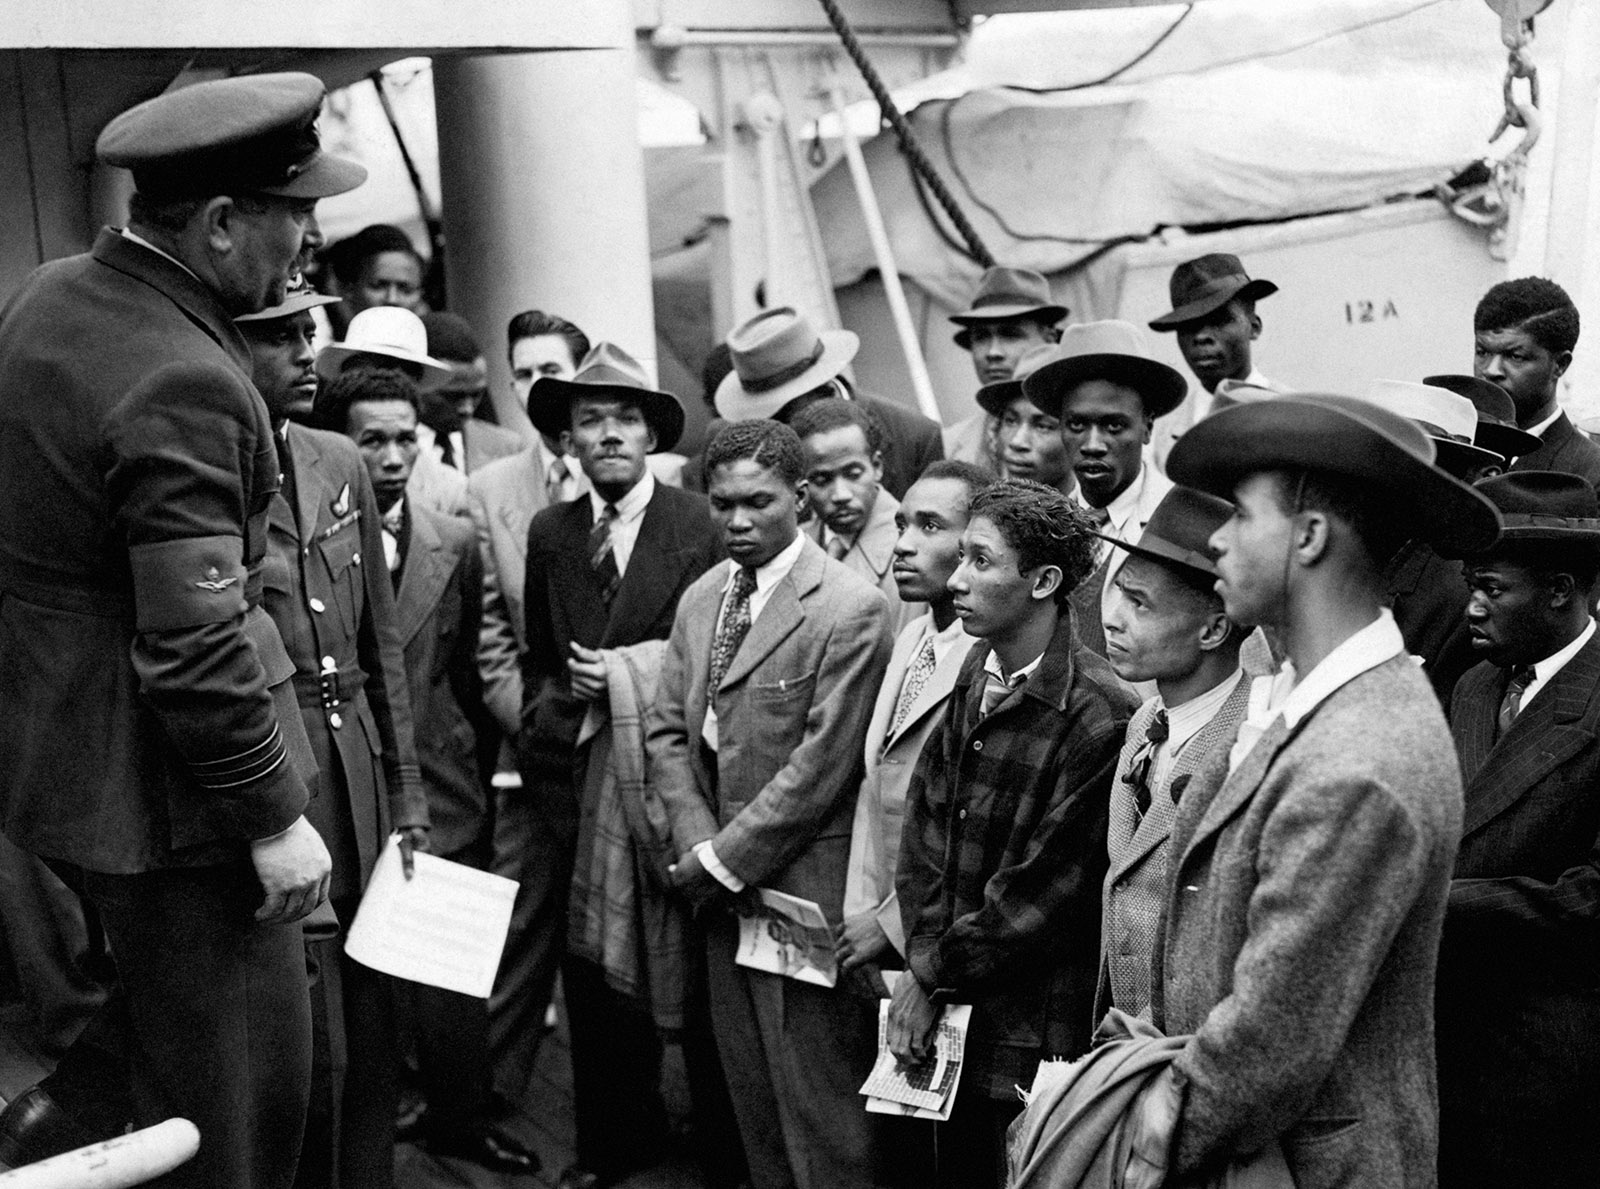 RAF officials from the Colonial Office welcoming Jamaican immigrants disembarked from the Empire Windrush at Tilbury docks, June 22, 1948